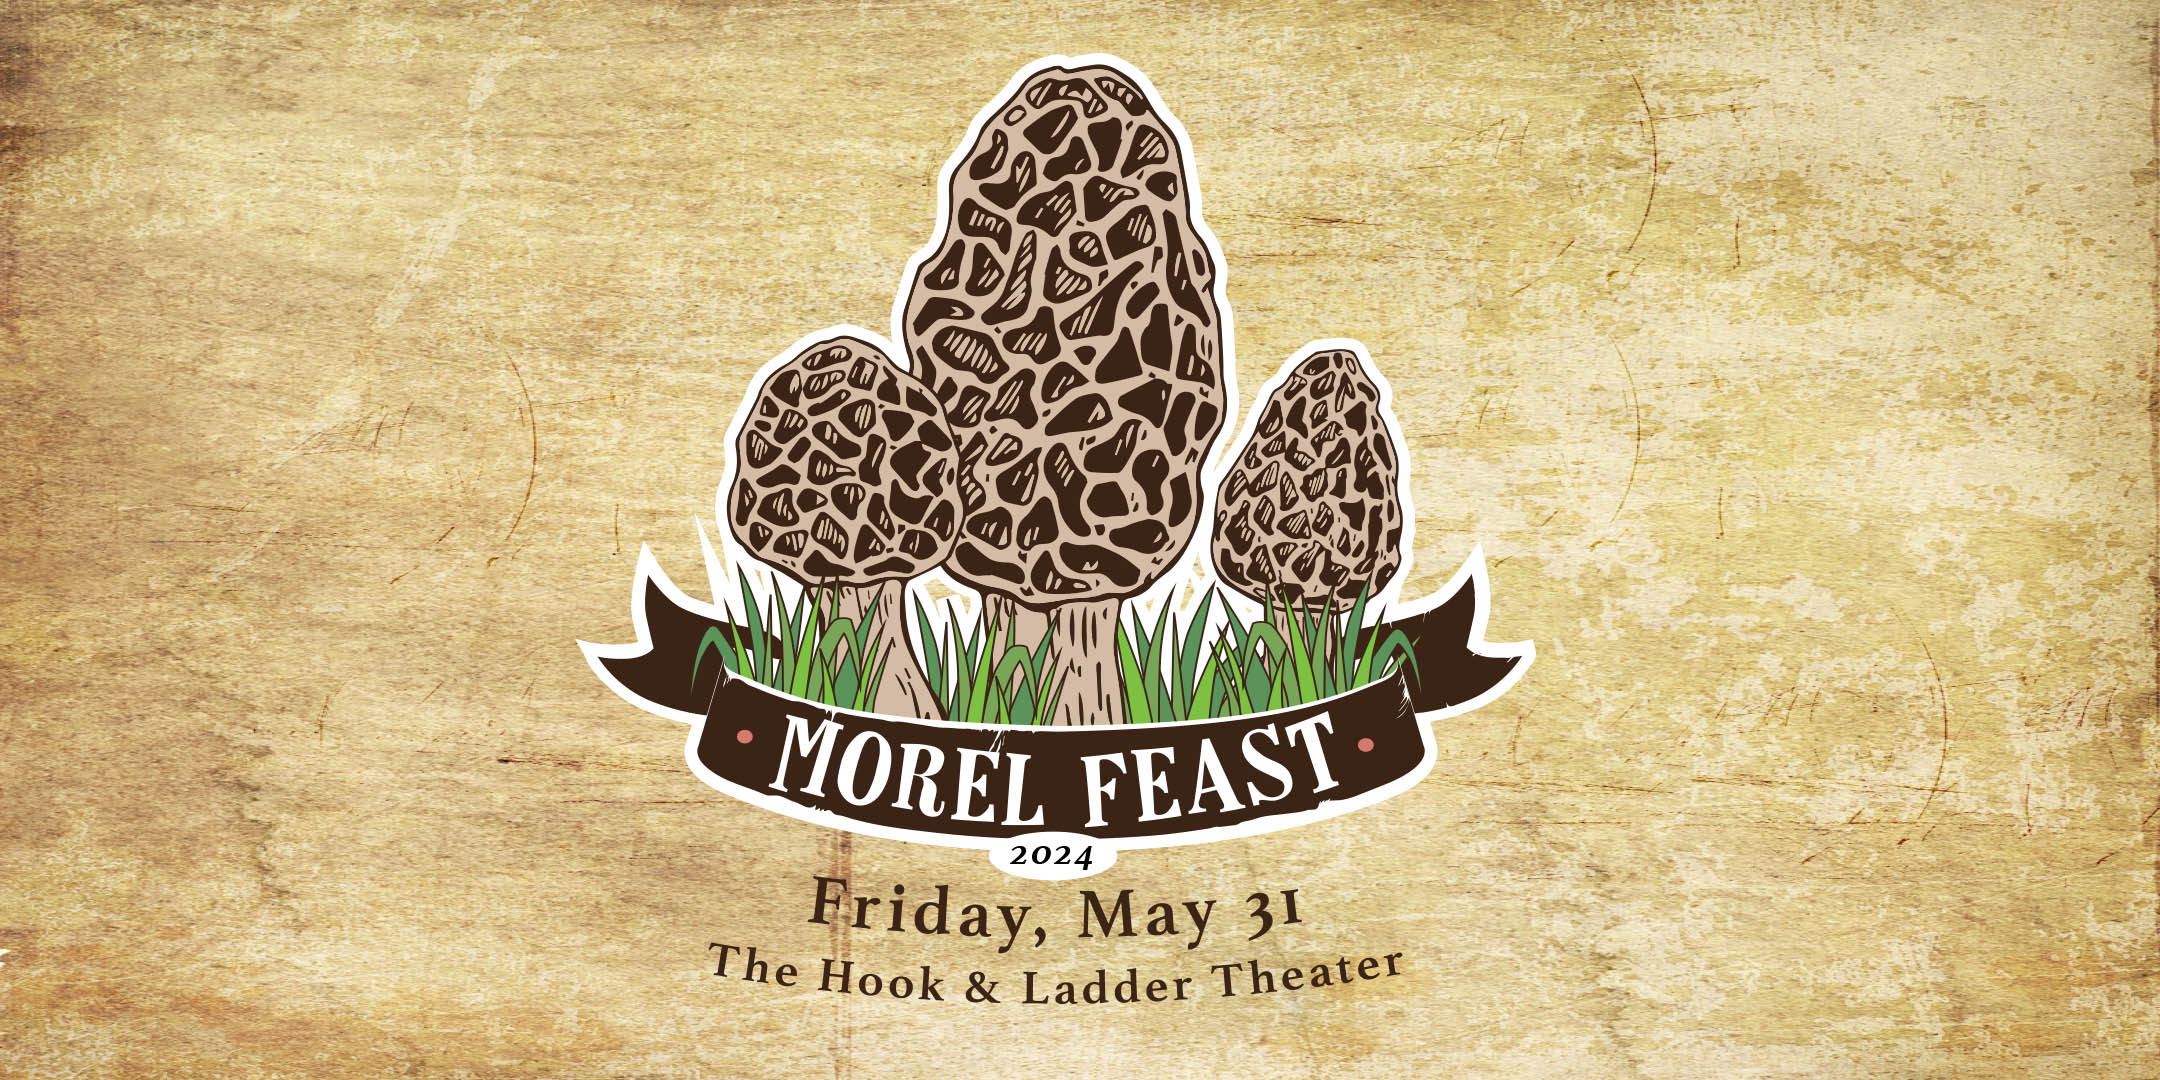 Morel Feast Fundraiser Friday, May 31 Under The Canopy at The Hook and Ladder Theater Cocktails & Snacks - 6pm Dinner (Station Service) - 7:00pm 21+ Reservations: $100 (Tickets limited) NO REFUNDS (This event sells-out every year, so please don’t wait to secure your tickets.)